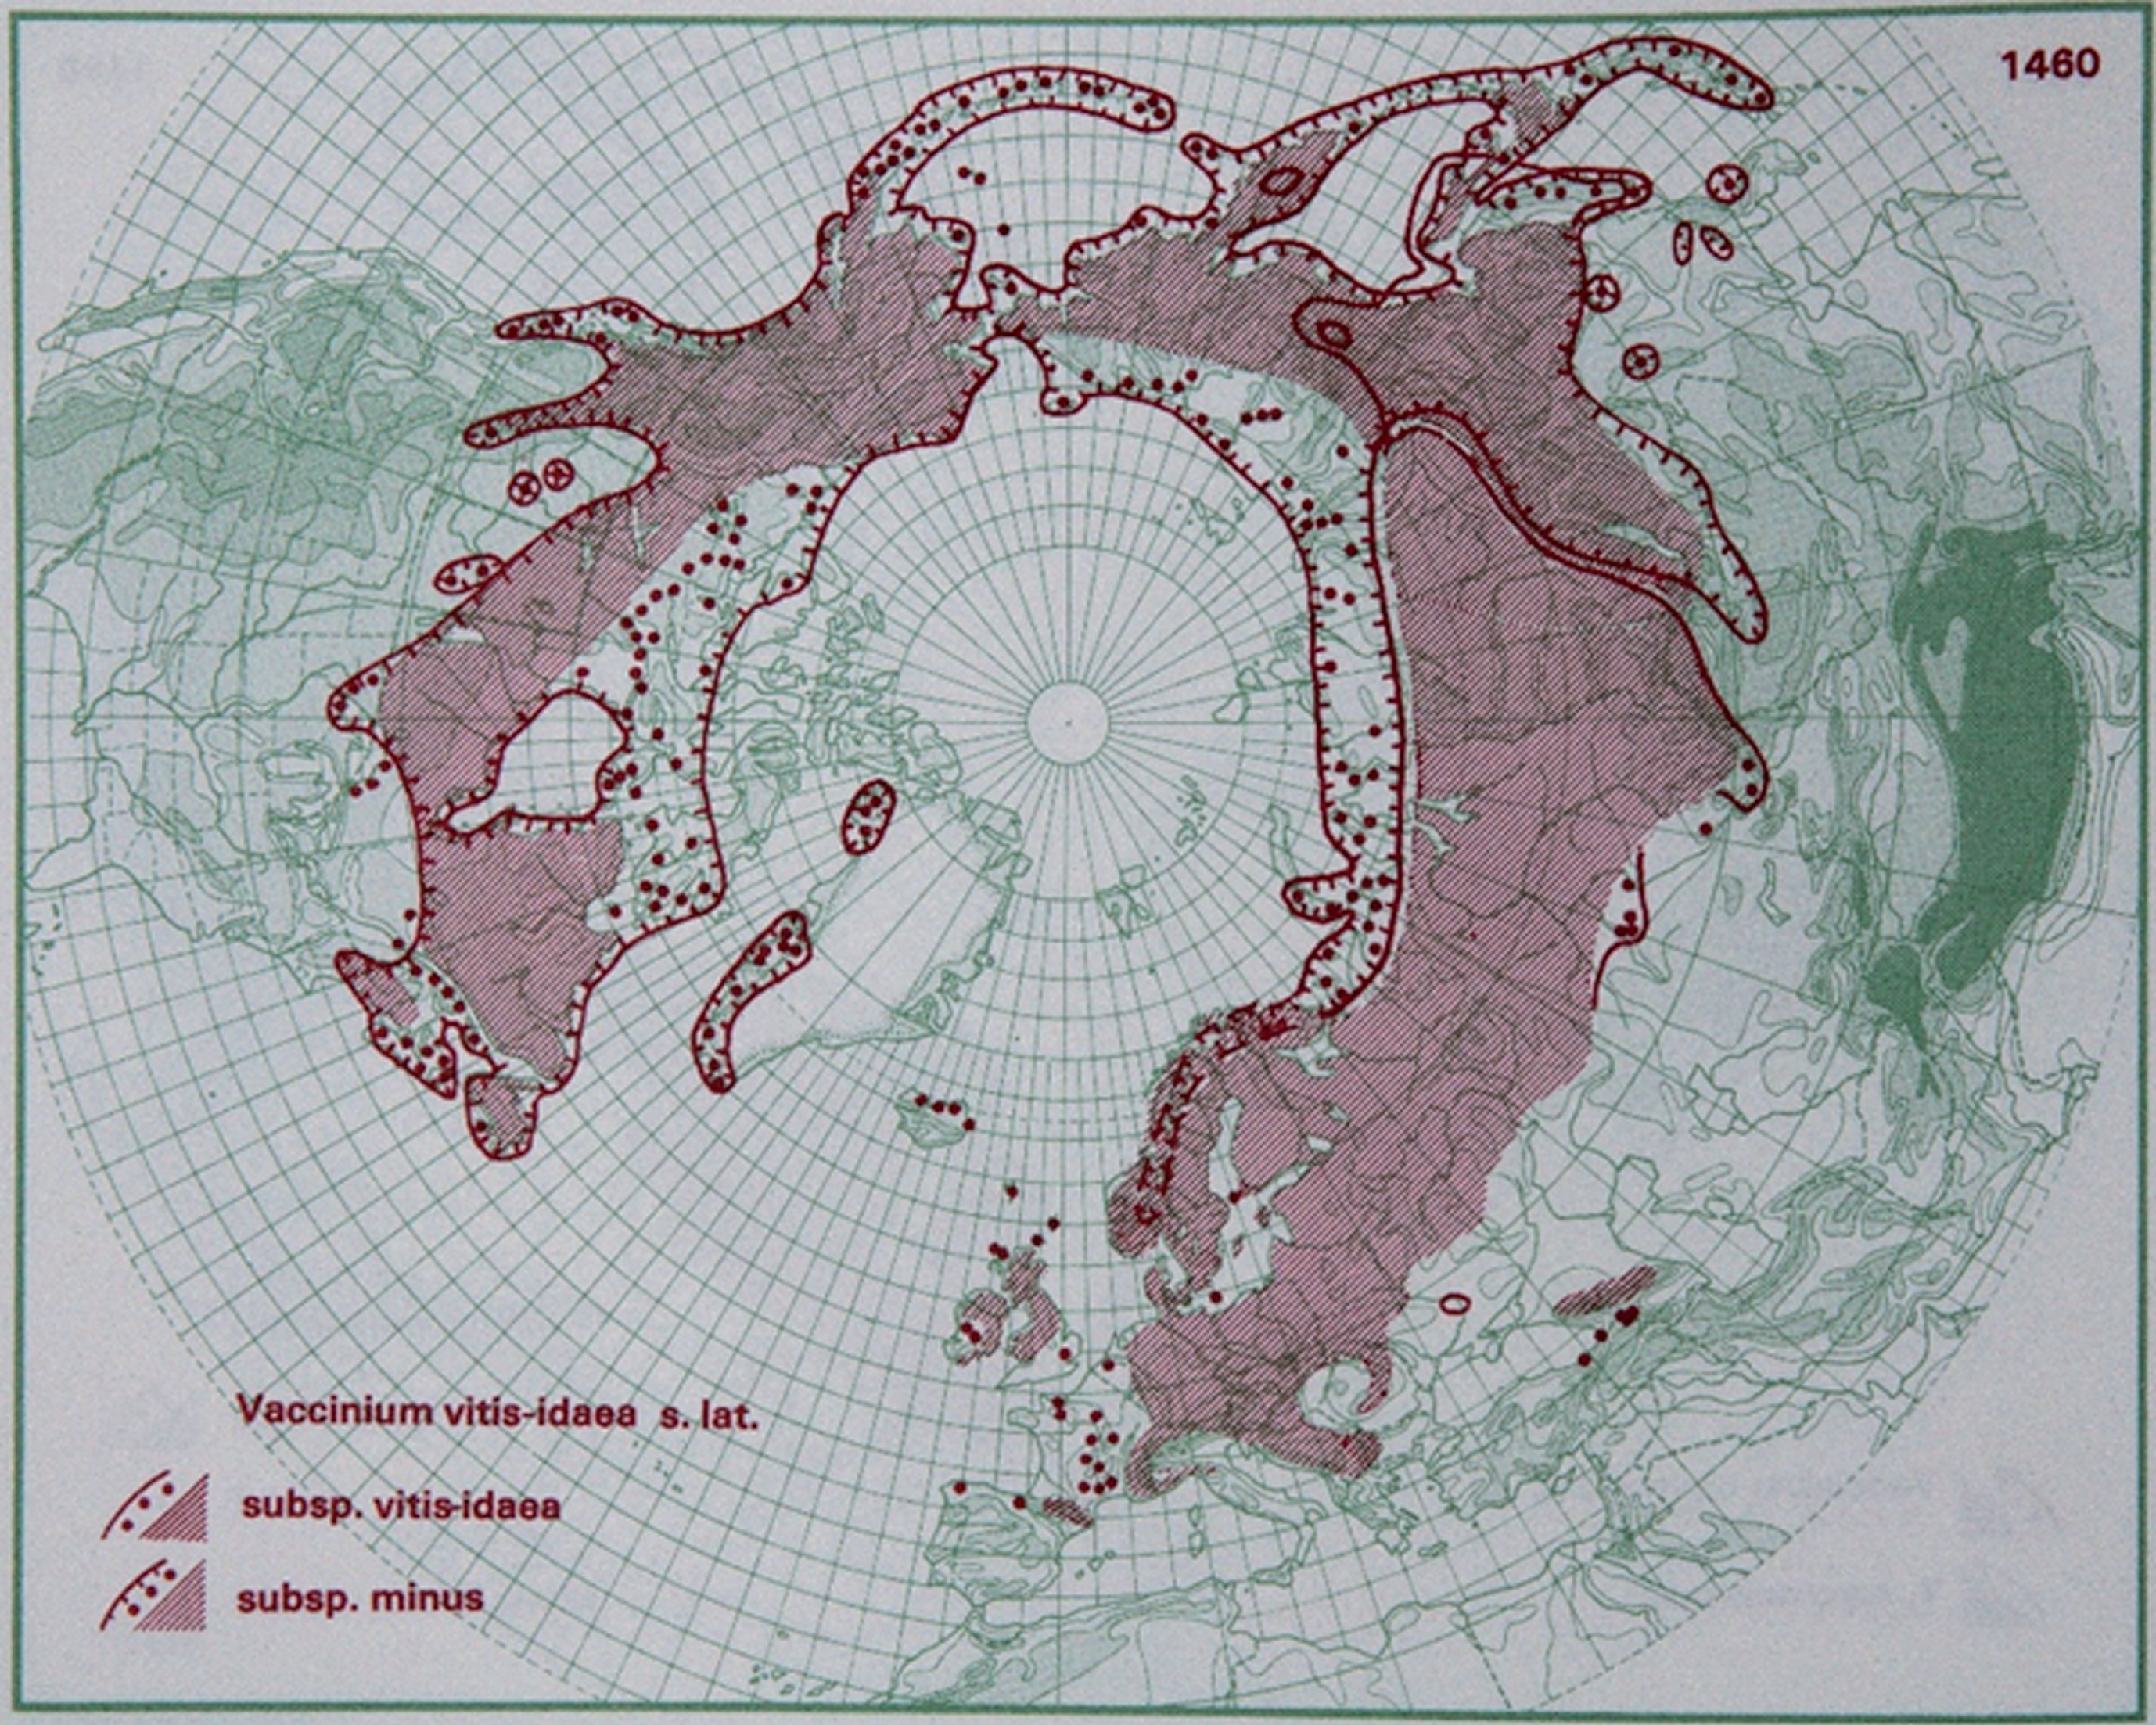 Distribution of V. vitis-idaea L. in the northern hemisphere (Hultén and Fries 1986), with the kind permission of Per Koeltz.